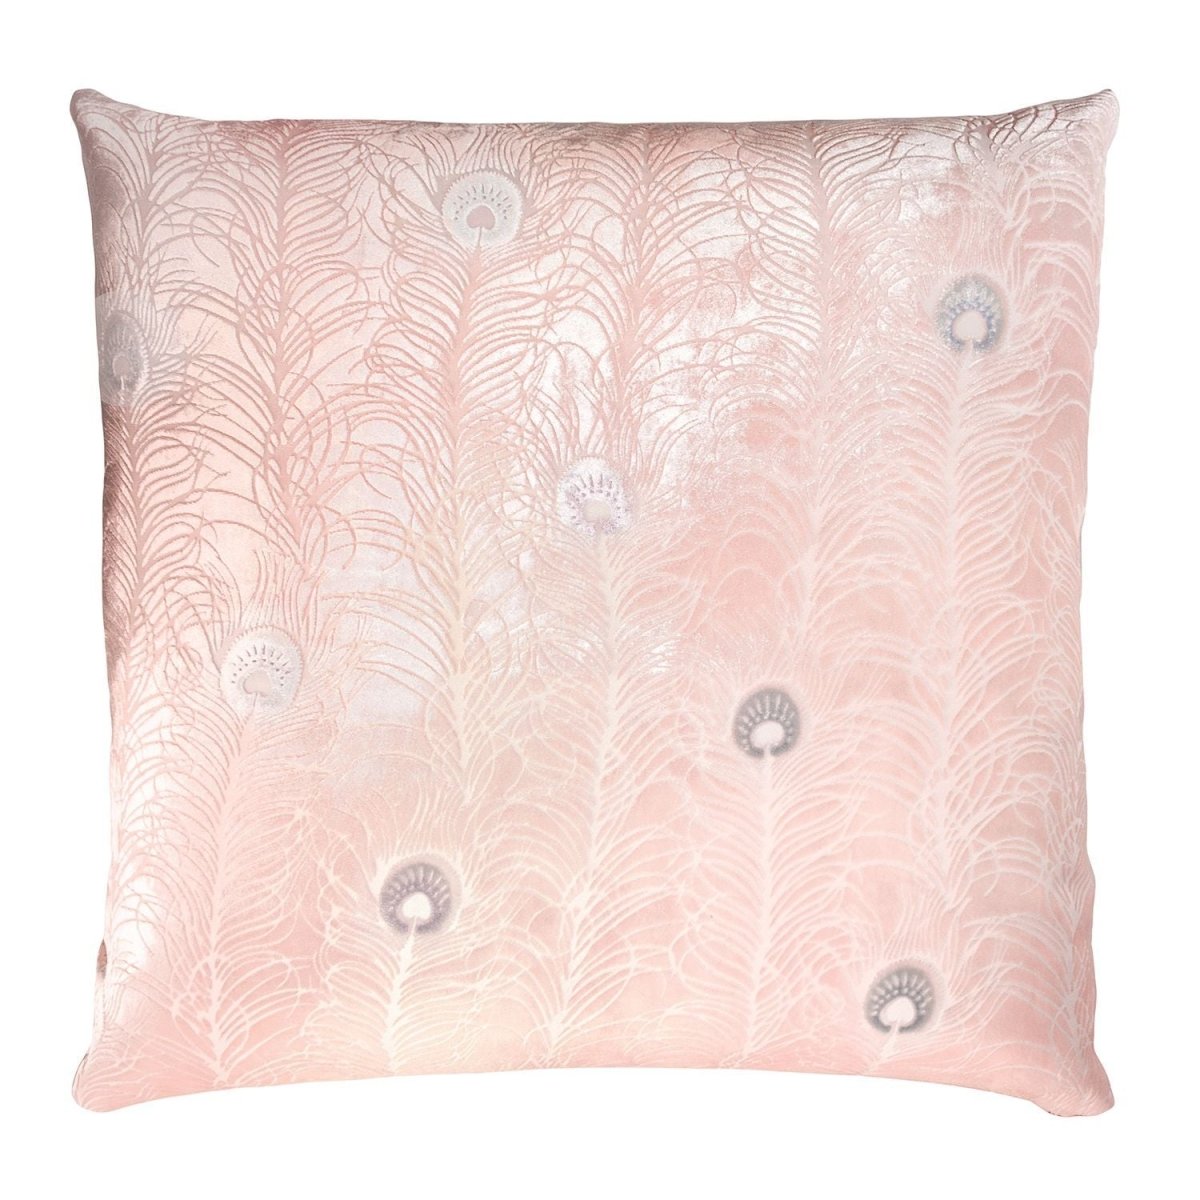 Blush Peacock Feather Decorative Pillow by Kevin O'Brien Studio